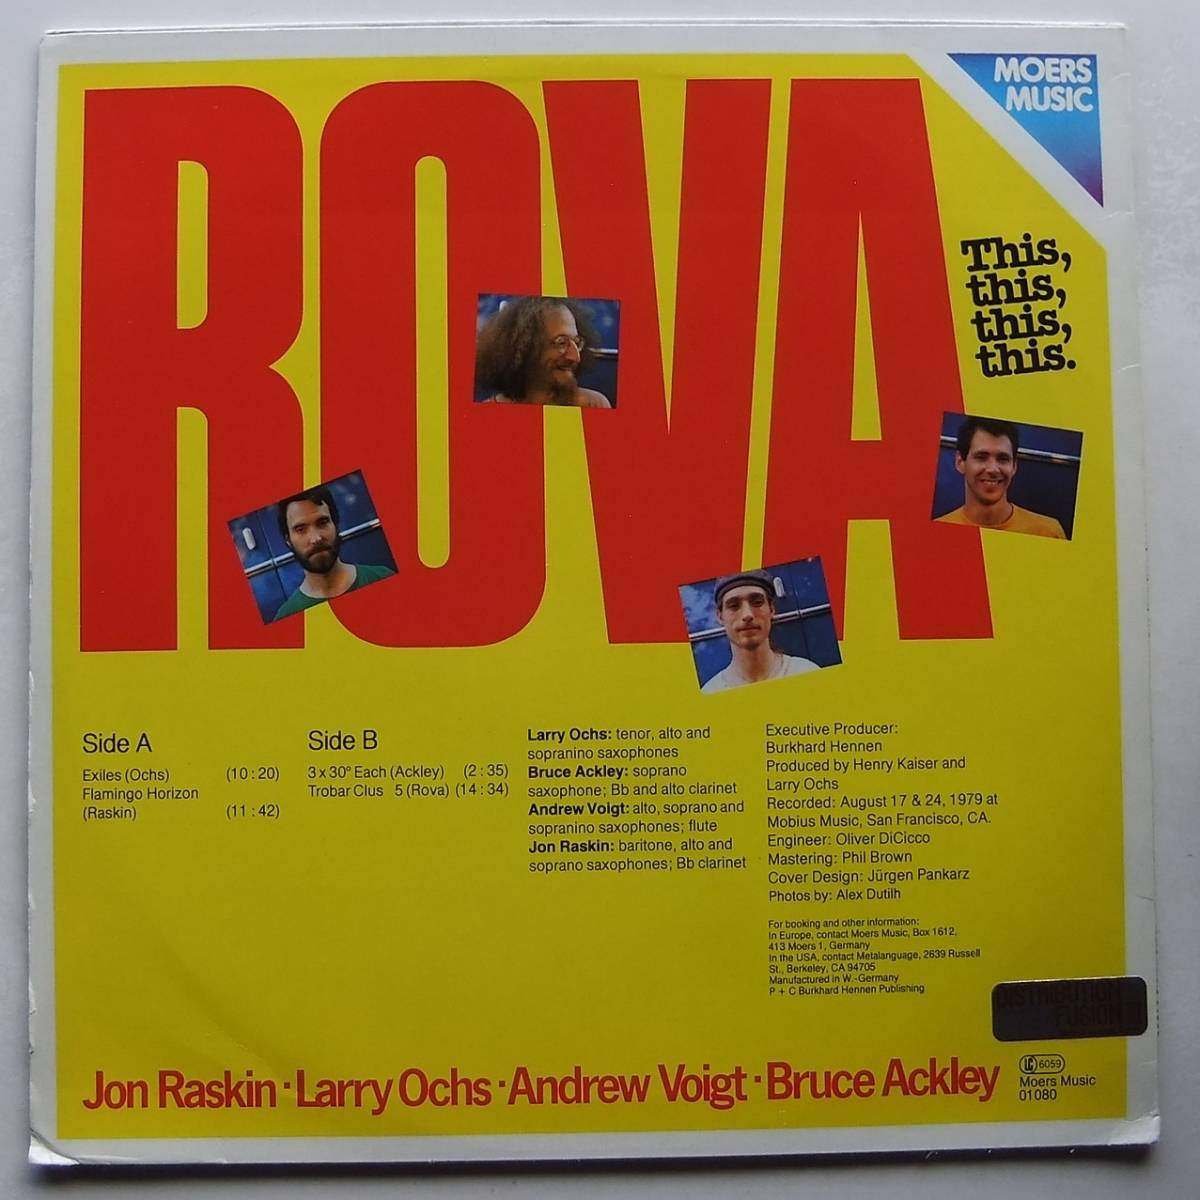 ◆ ROVA / This, This, This, This ◆ Moers Music 01080 (West Germany) ◆_画像2